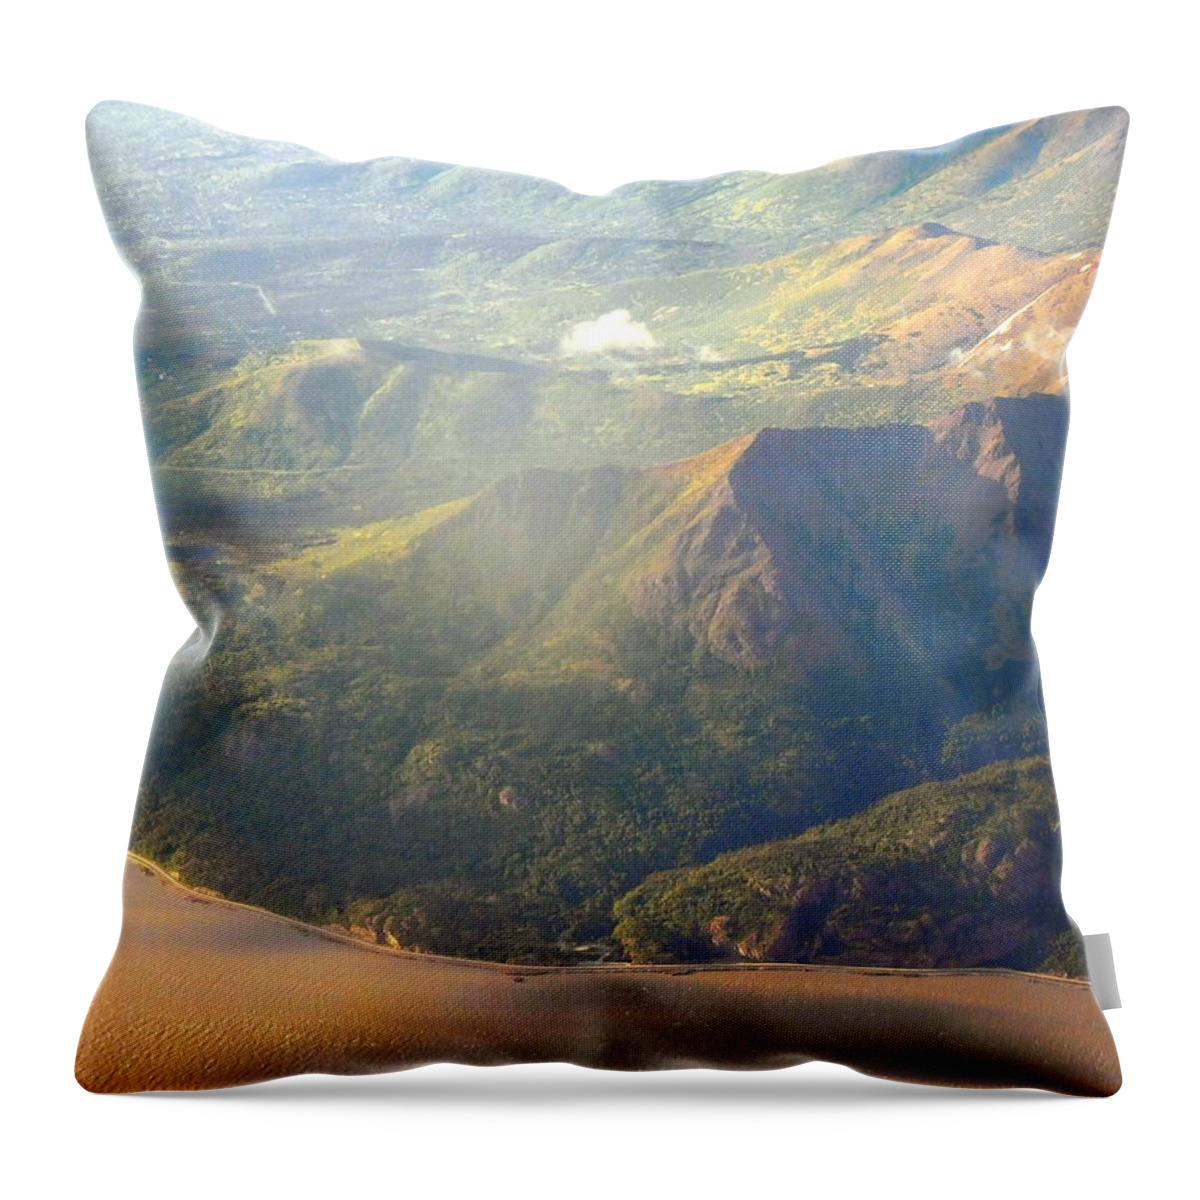 Mountains Throw Pillow featuring the photograph How Great Thou Art His Mountain Range by Diannah Lynch